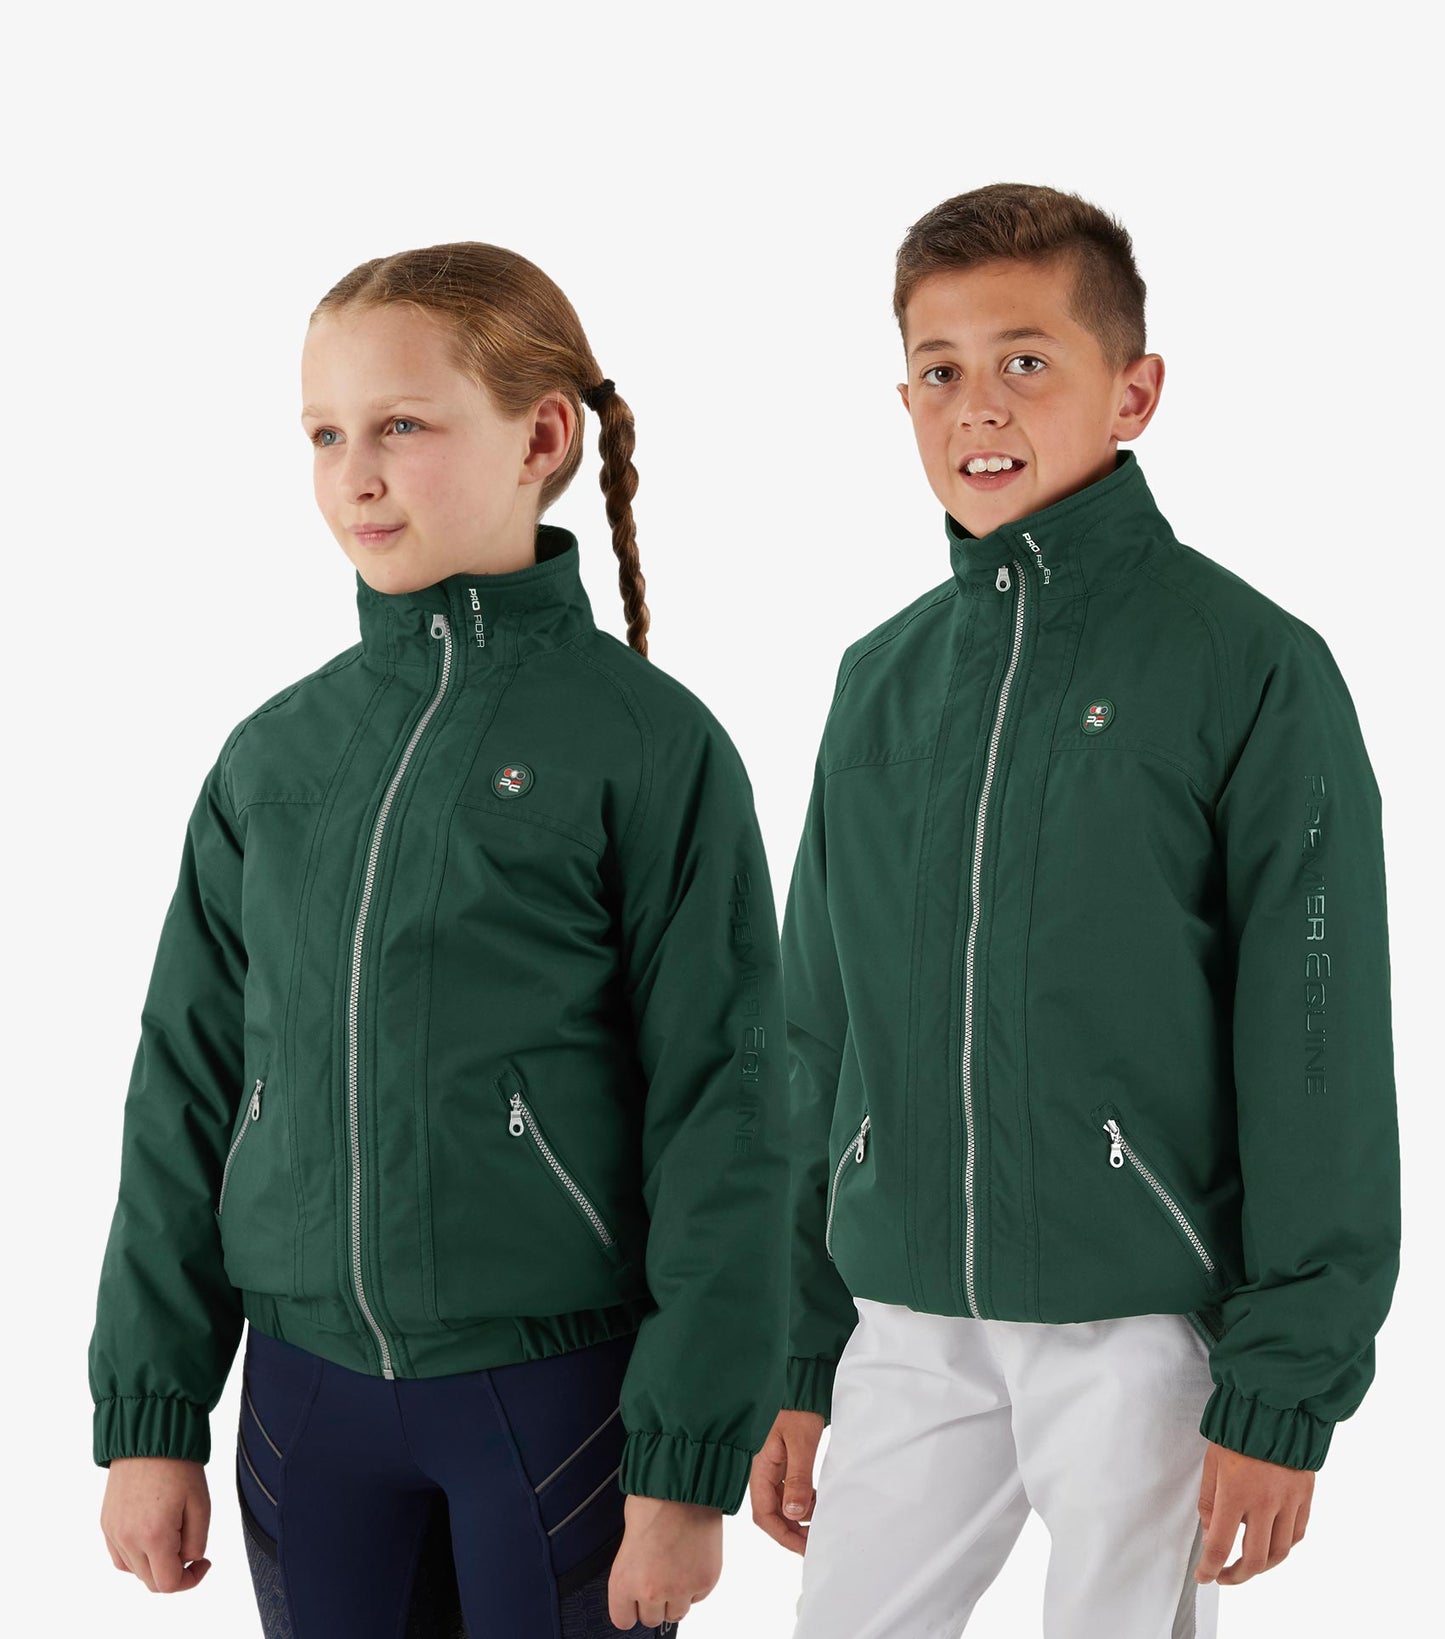 Premier Equine Kids Pro Rider Riding Jacket (boys and girls)